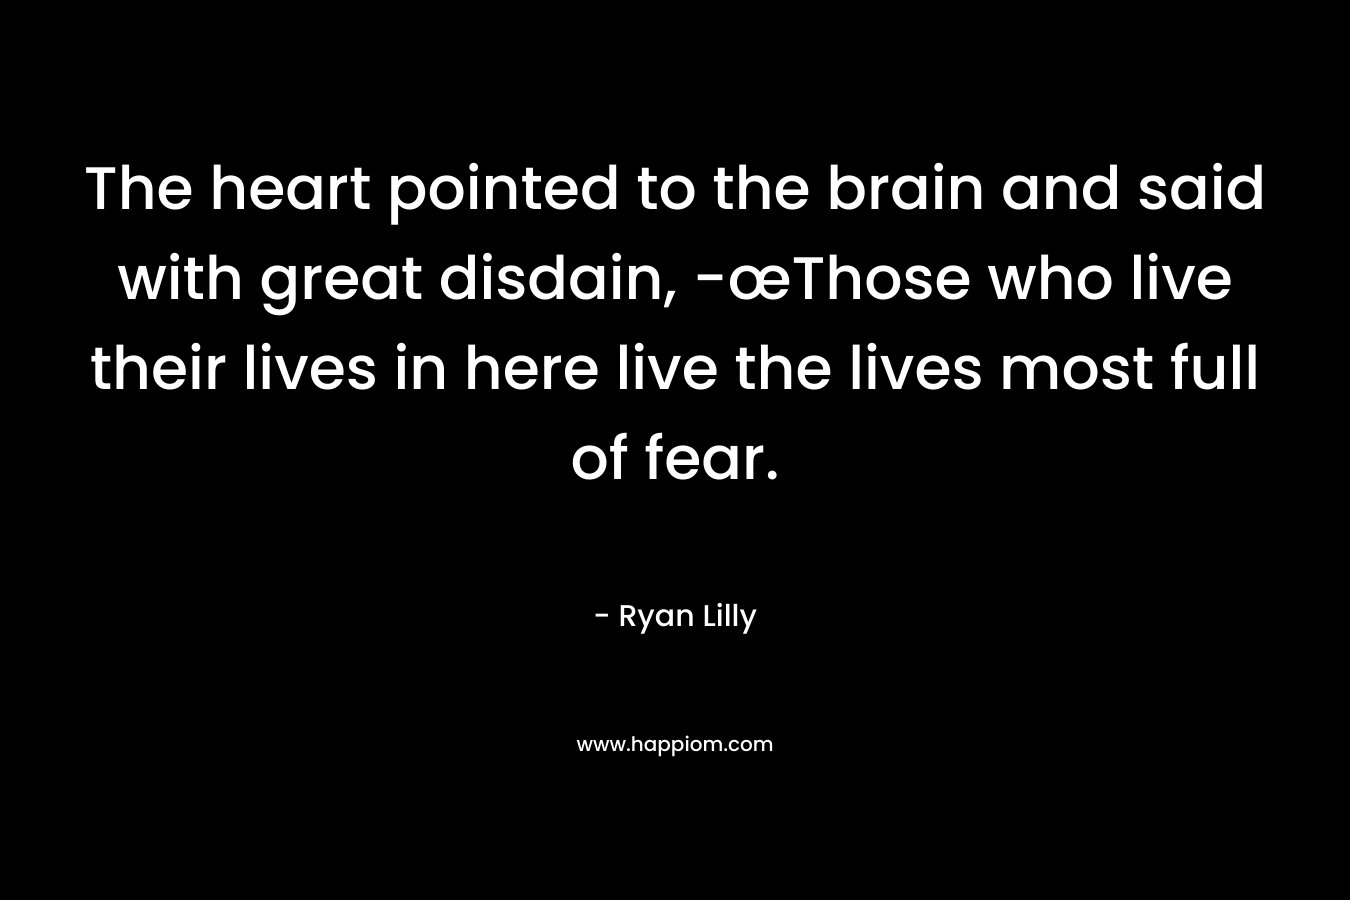 The heart pointed to the brain and said with great disdain, -œThose who live their lives in here live the lives most full of fear.